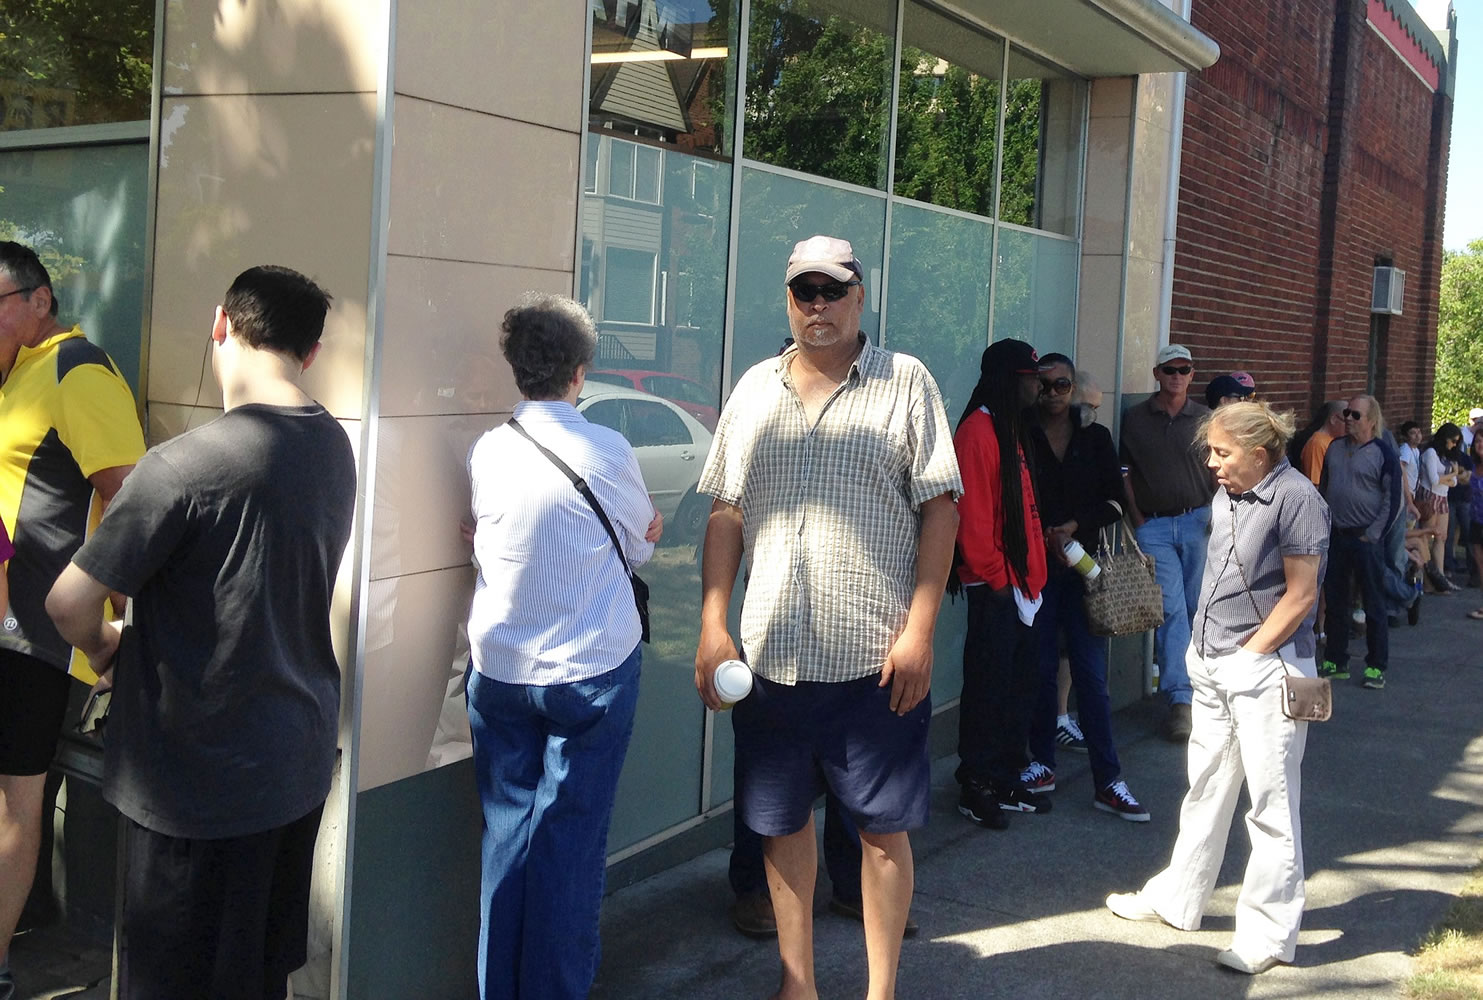 Customers were lined up for a second day at Main Street Marijuana in Uptown Village.